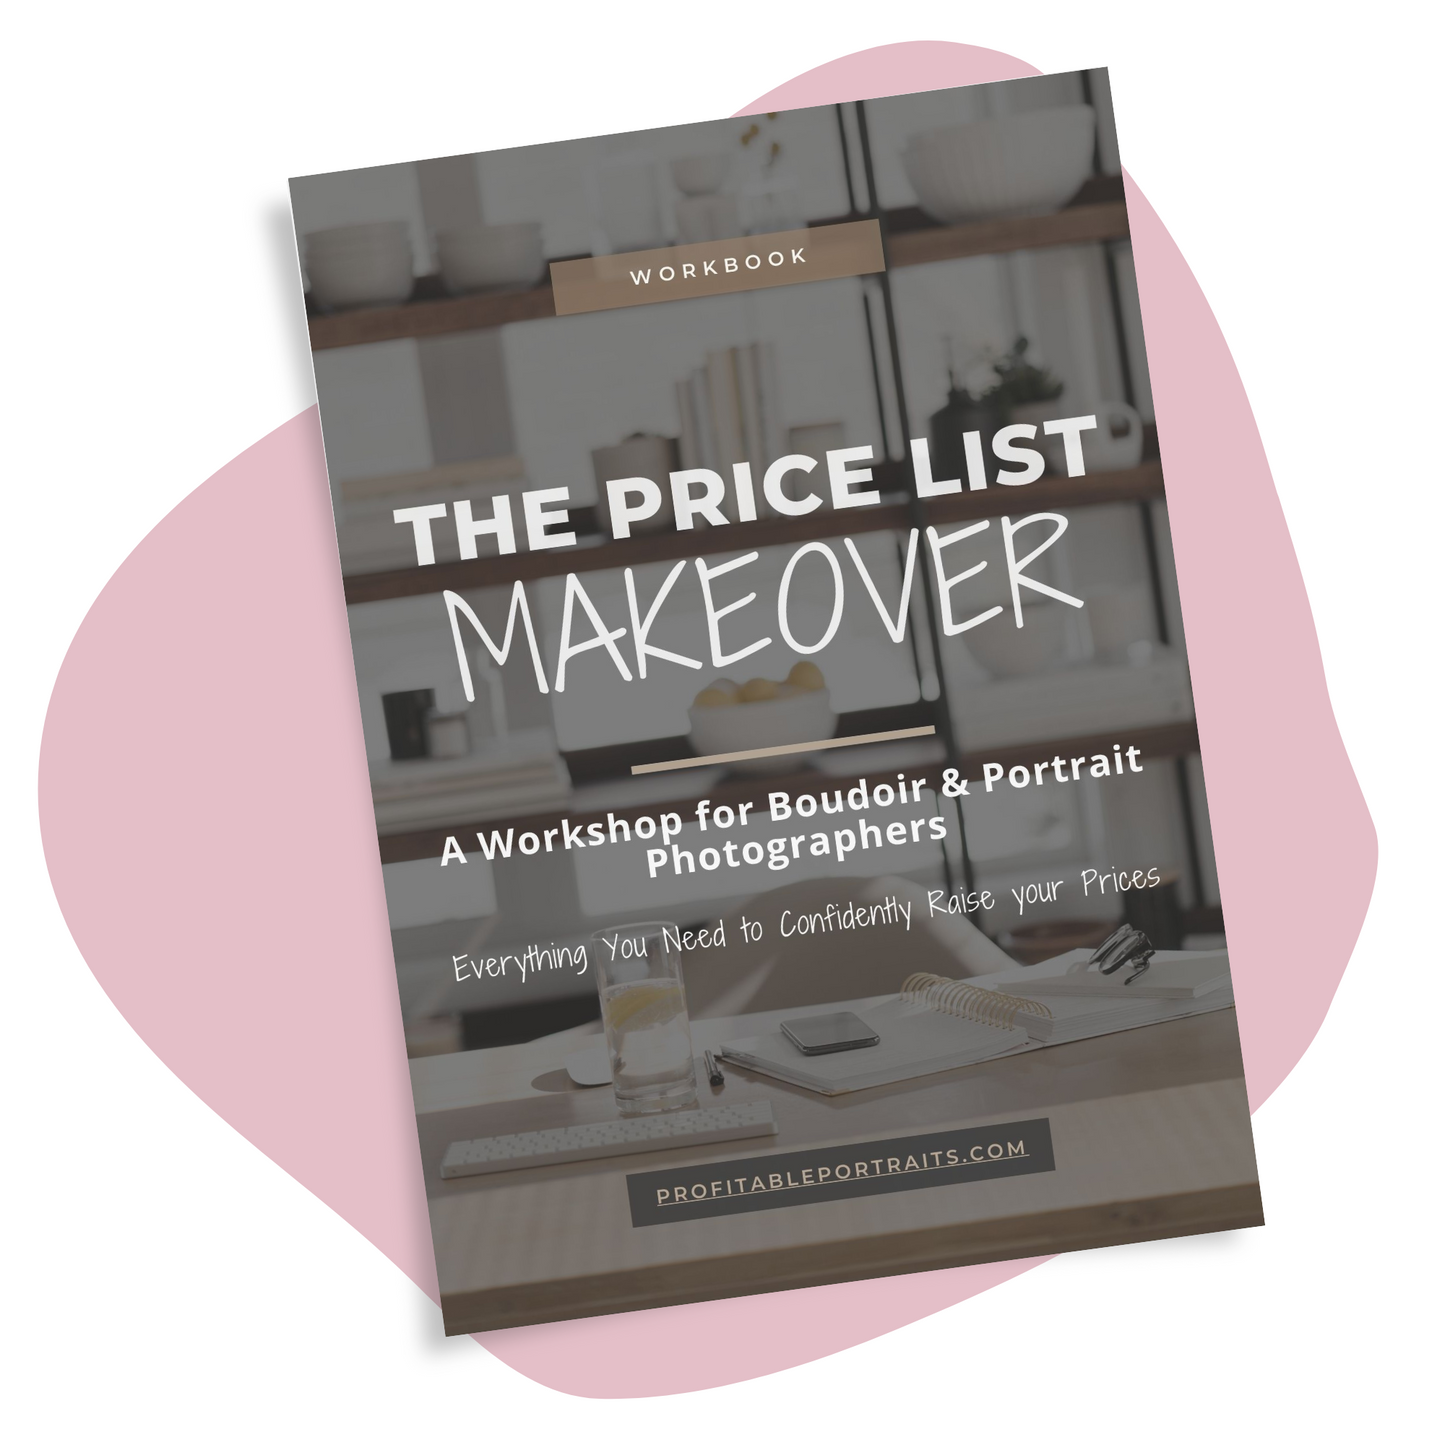 The Price List Makeover